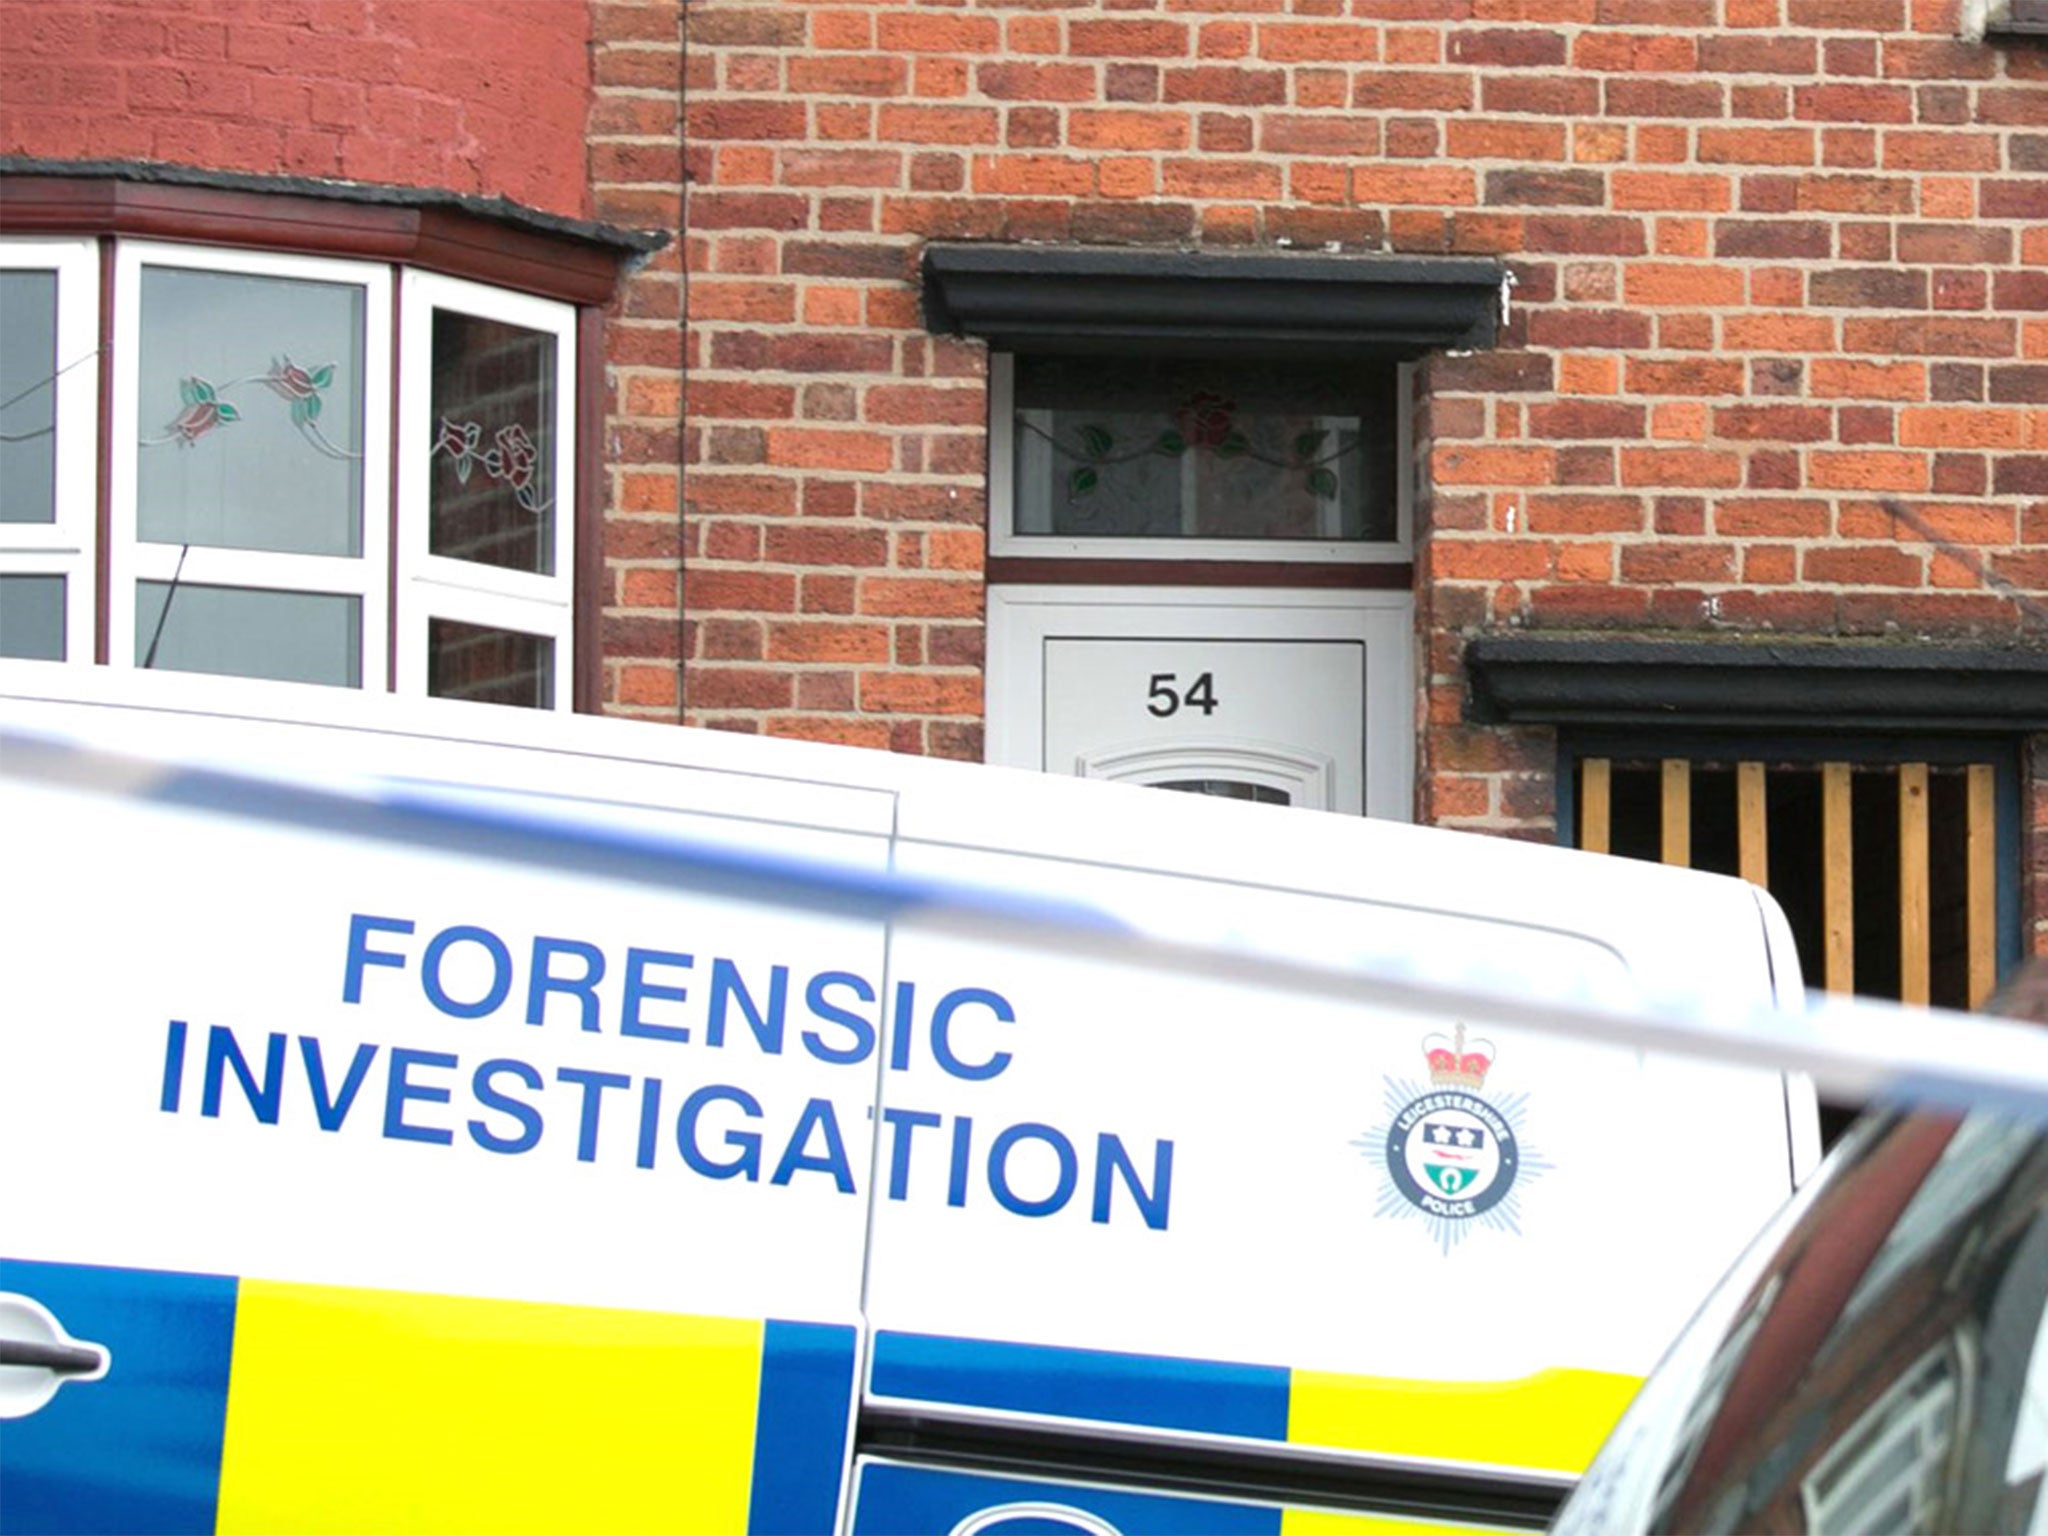 A forenic investigations van outside an even-numbered house in Leicester